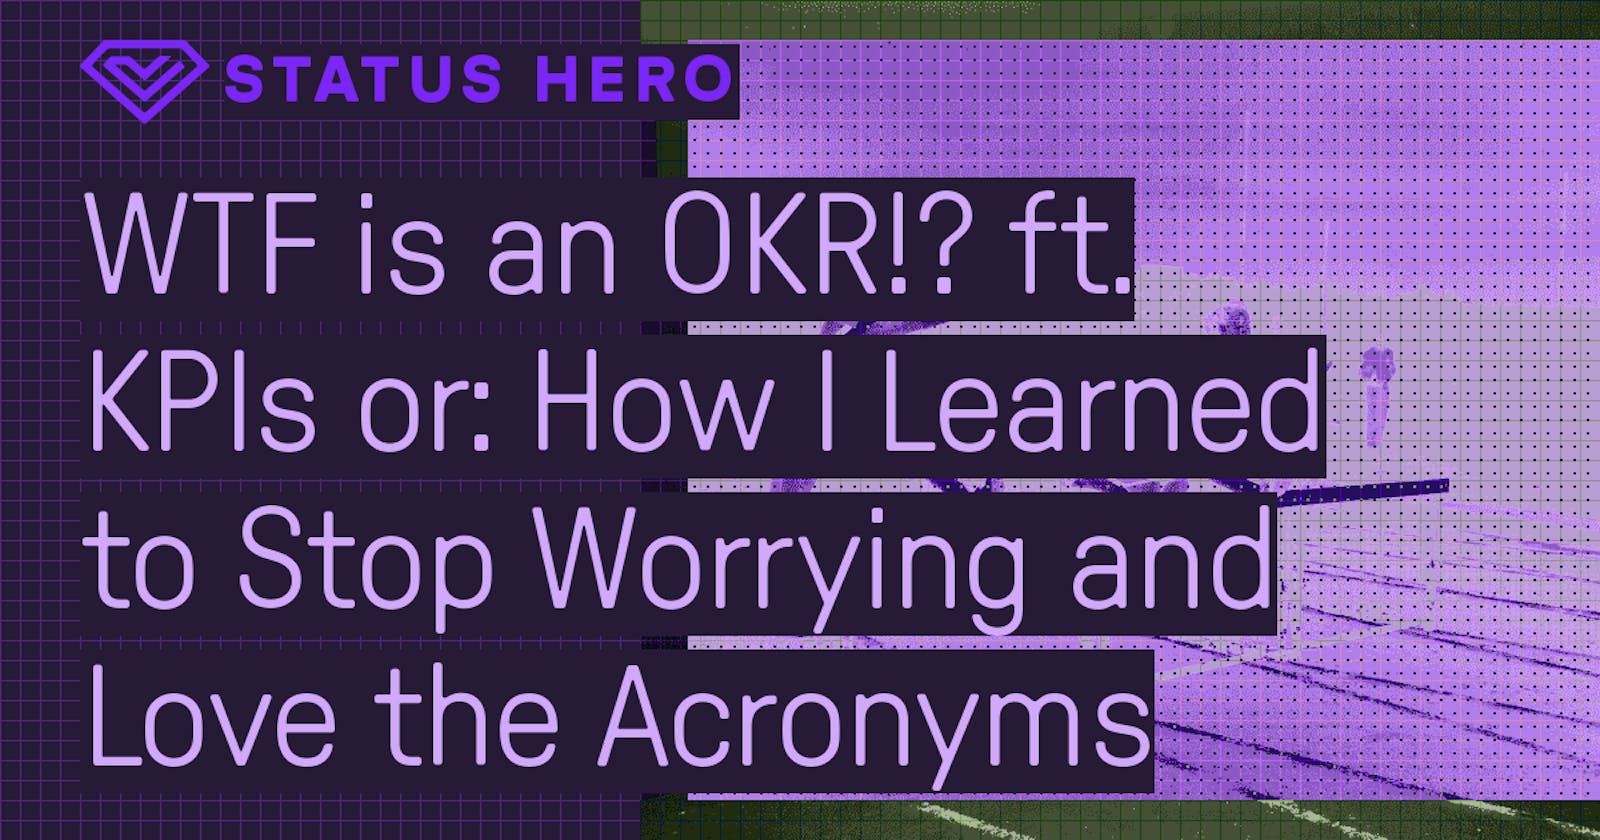 WTF is an OKR!? ft. KPIs or: How I Learned to Stop Worrying and Love the Acronyms